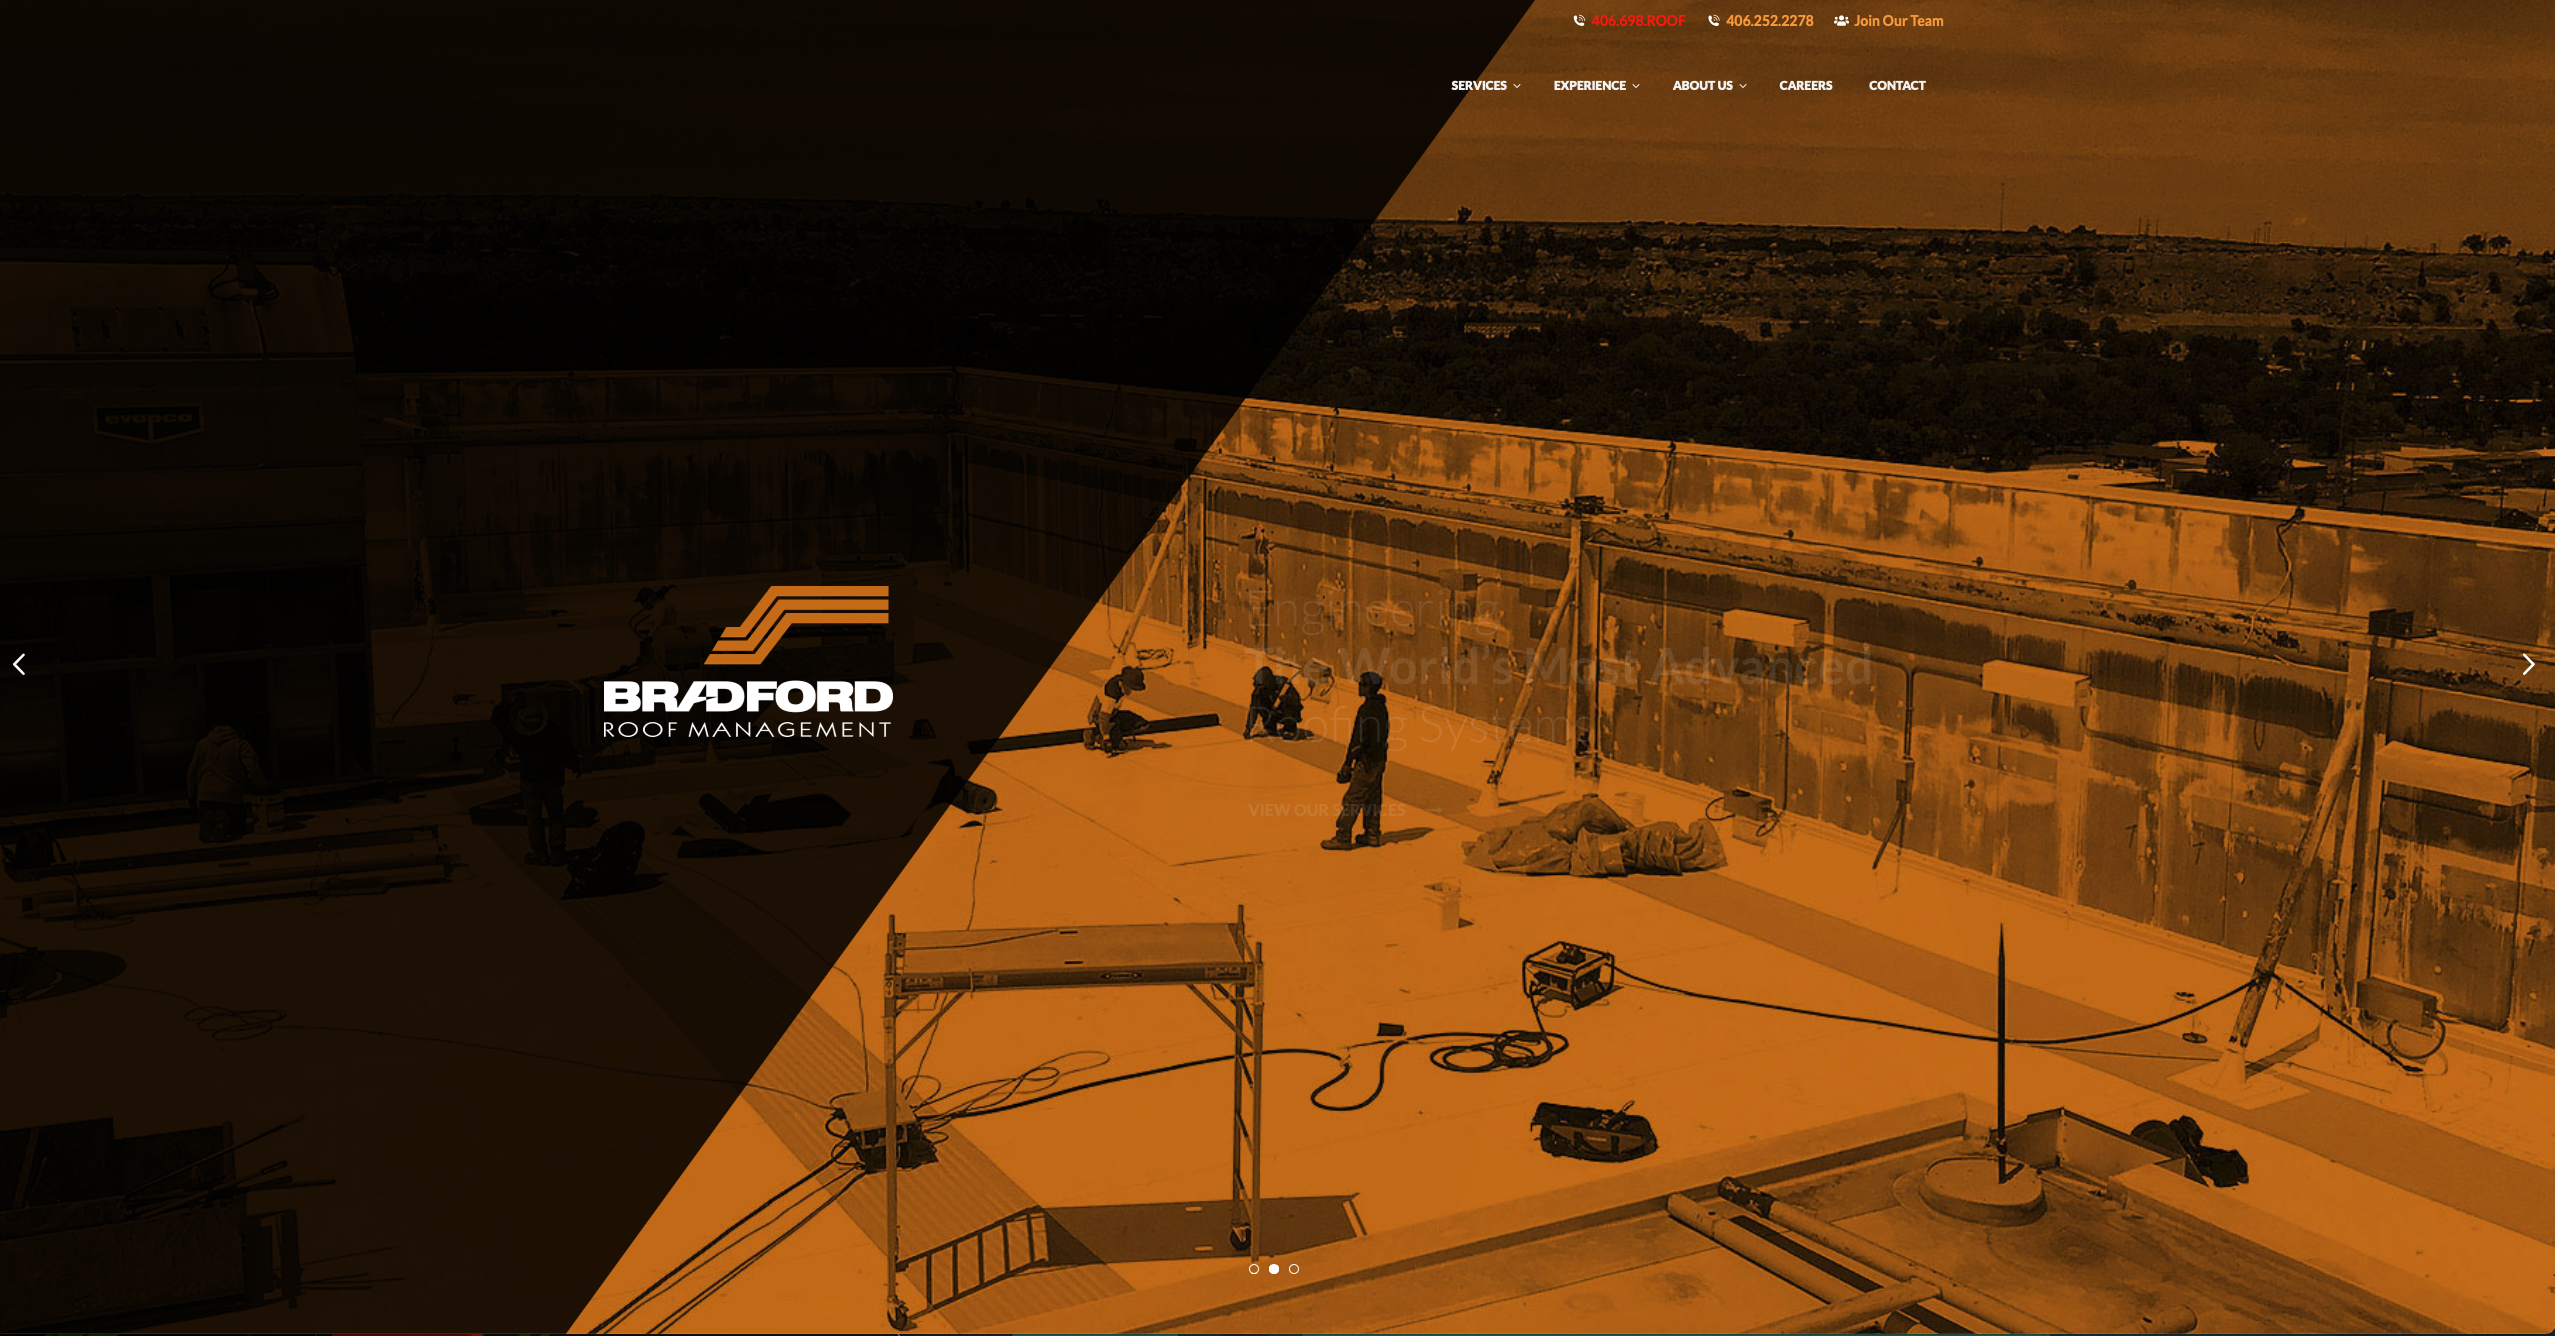 Bradford Roofing Home Page Still